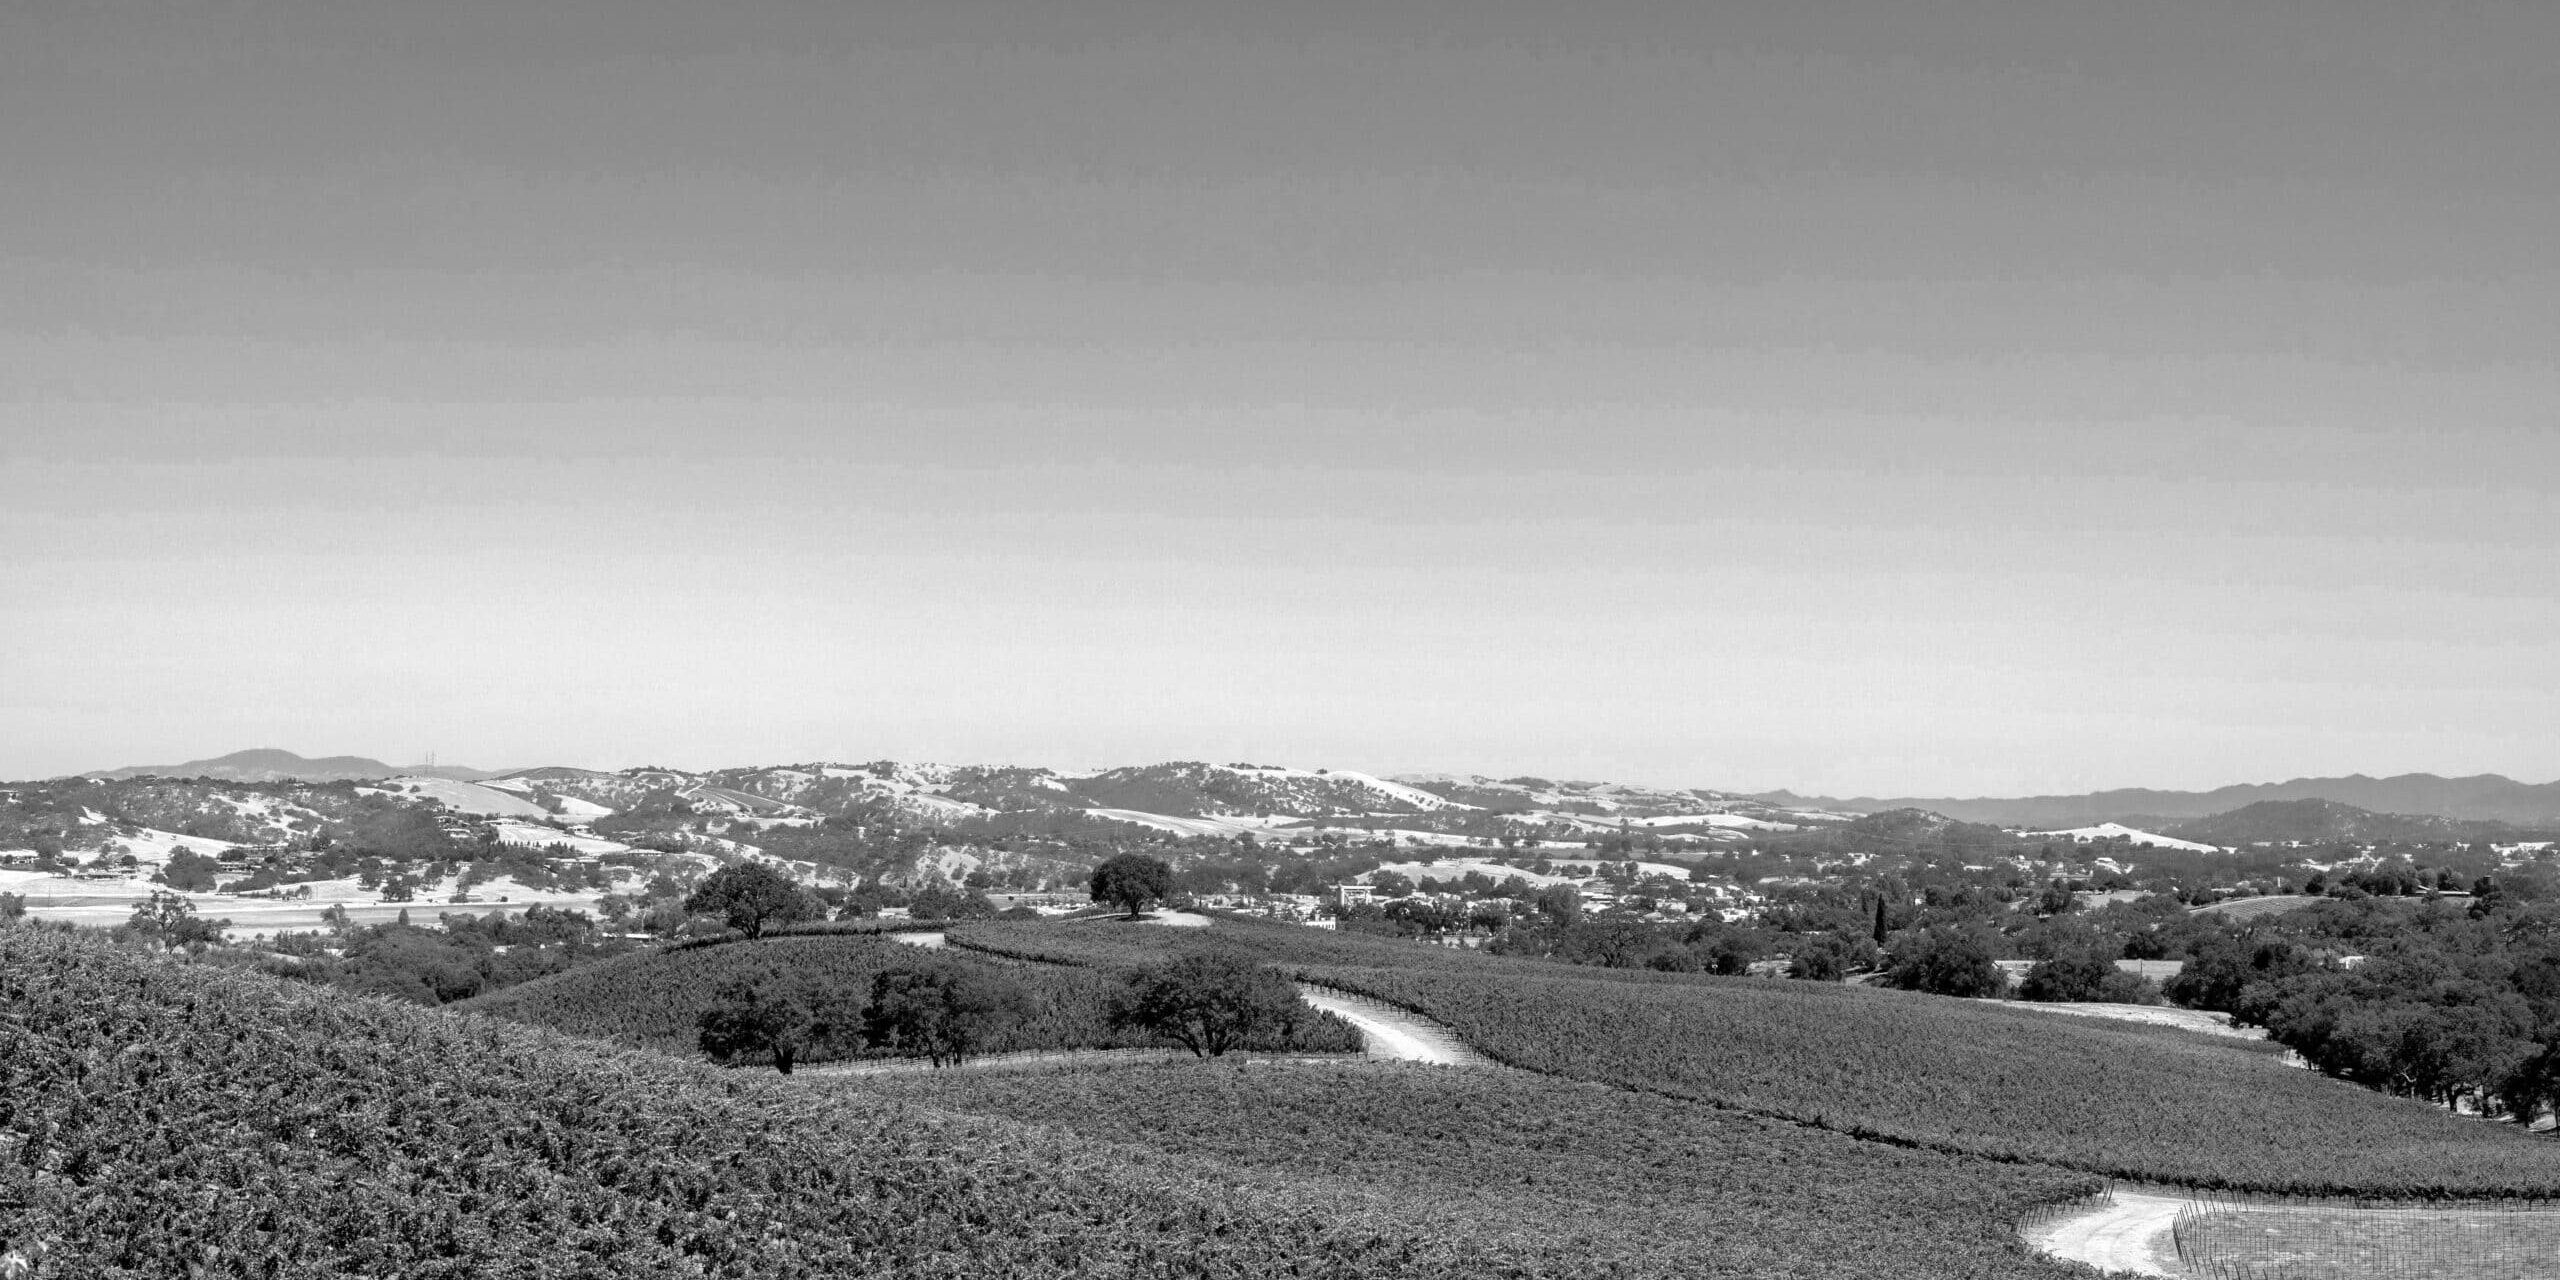 The rolling hills of Paso Robles with vineyards in black and white